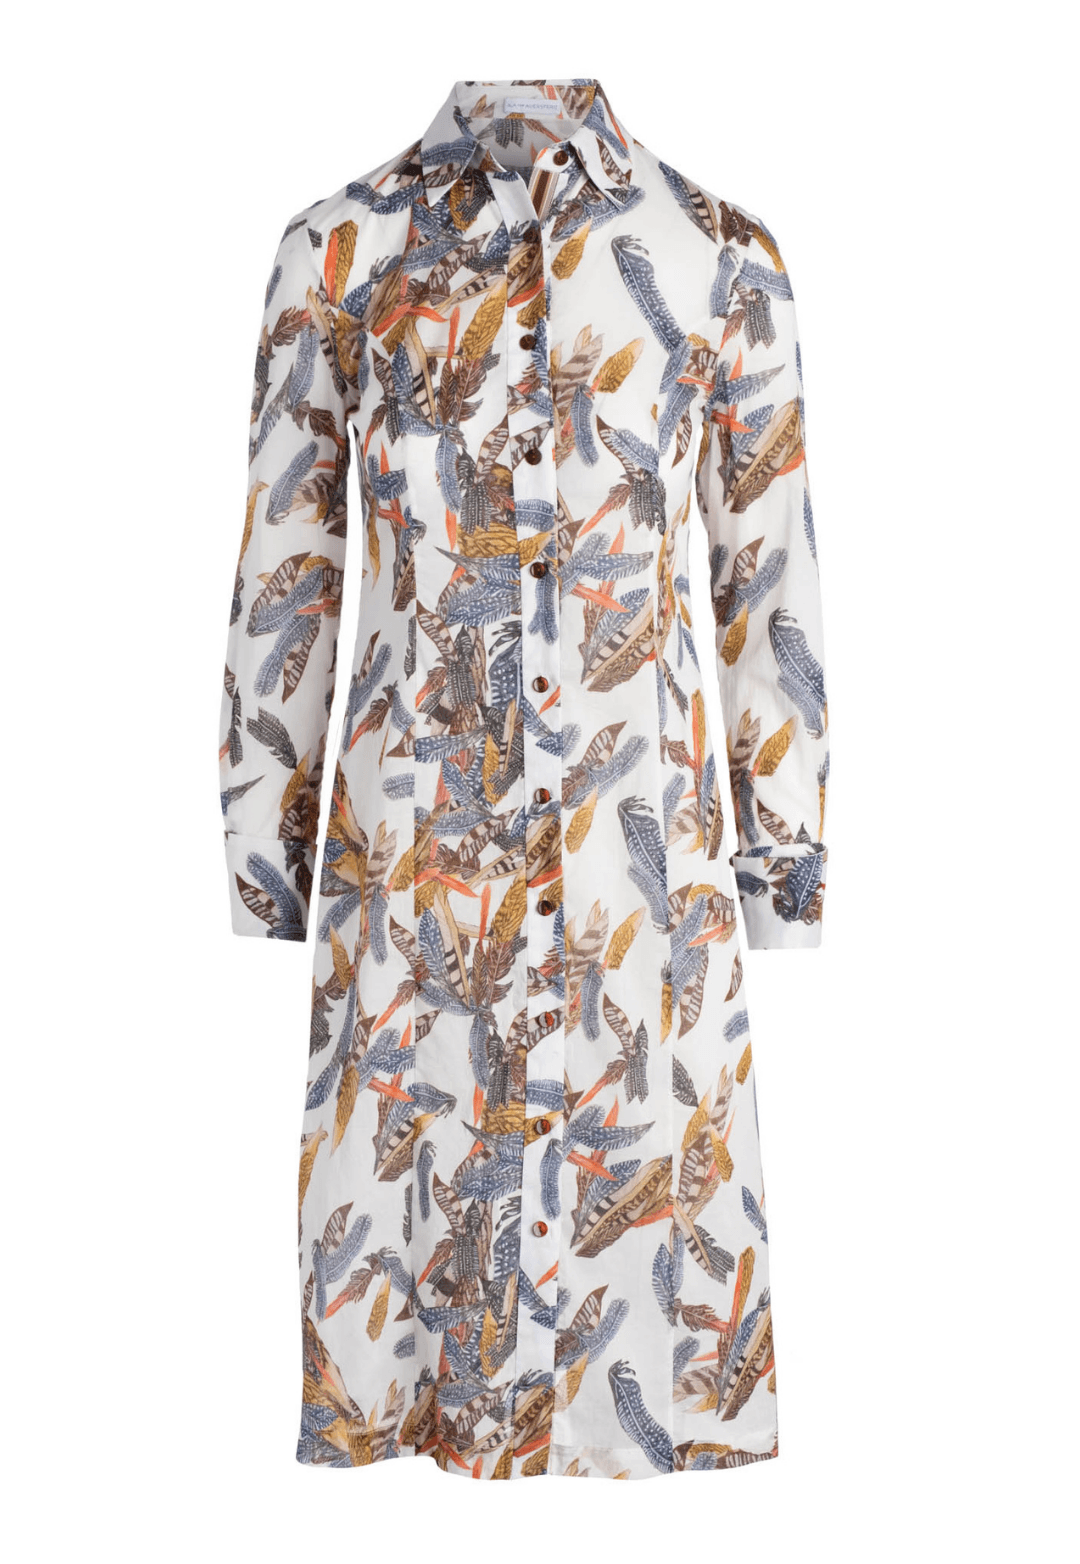 cotton white feather printed shirt knee length dress with French cuffs by Ala von Auersperg for fall 2020